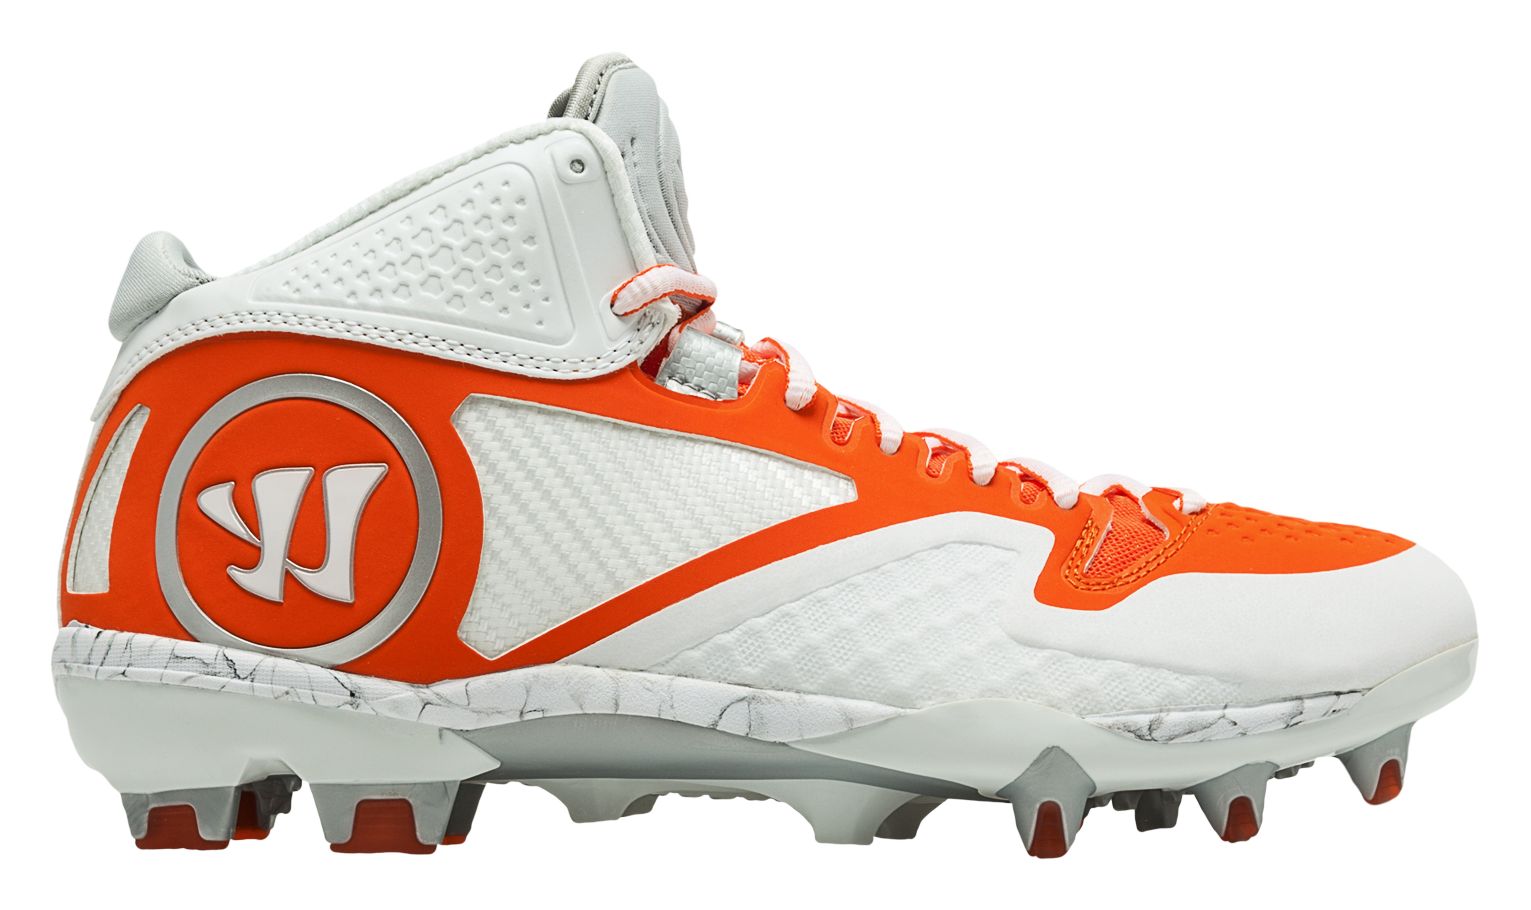 Adonis 2.0 Cleat, White with Orange image number 0